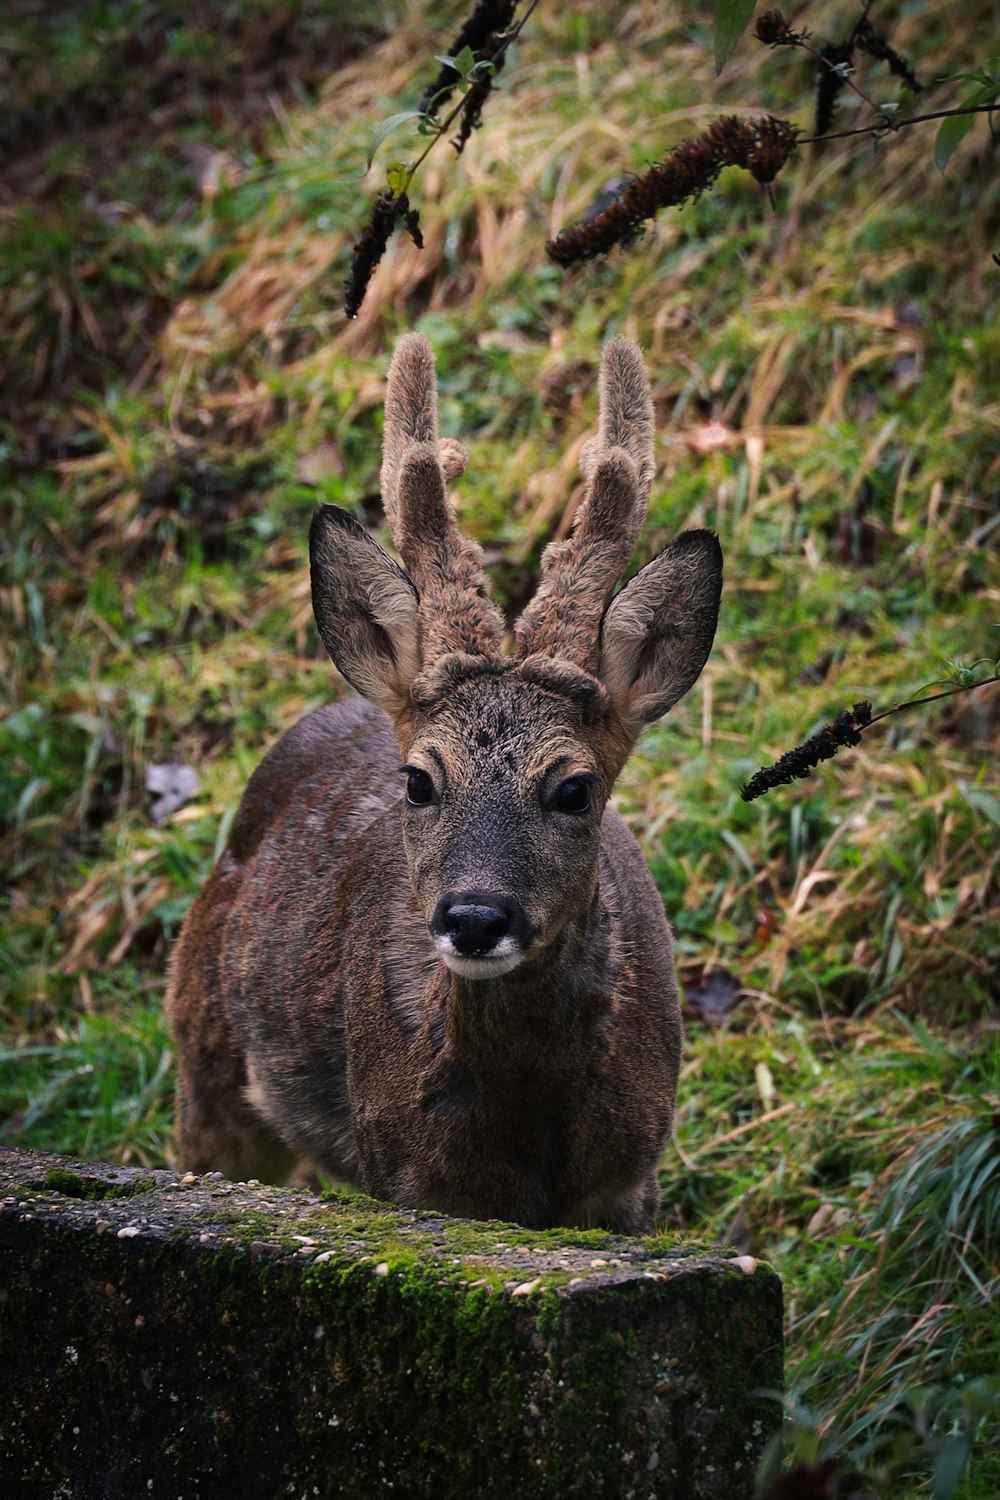 a deer is standing in a grassy area